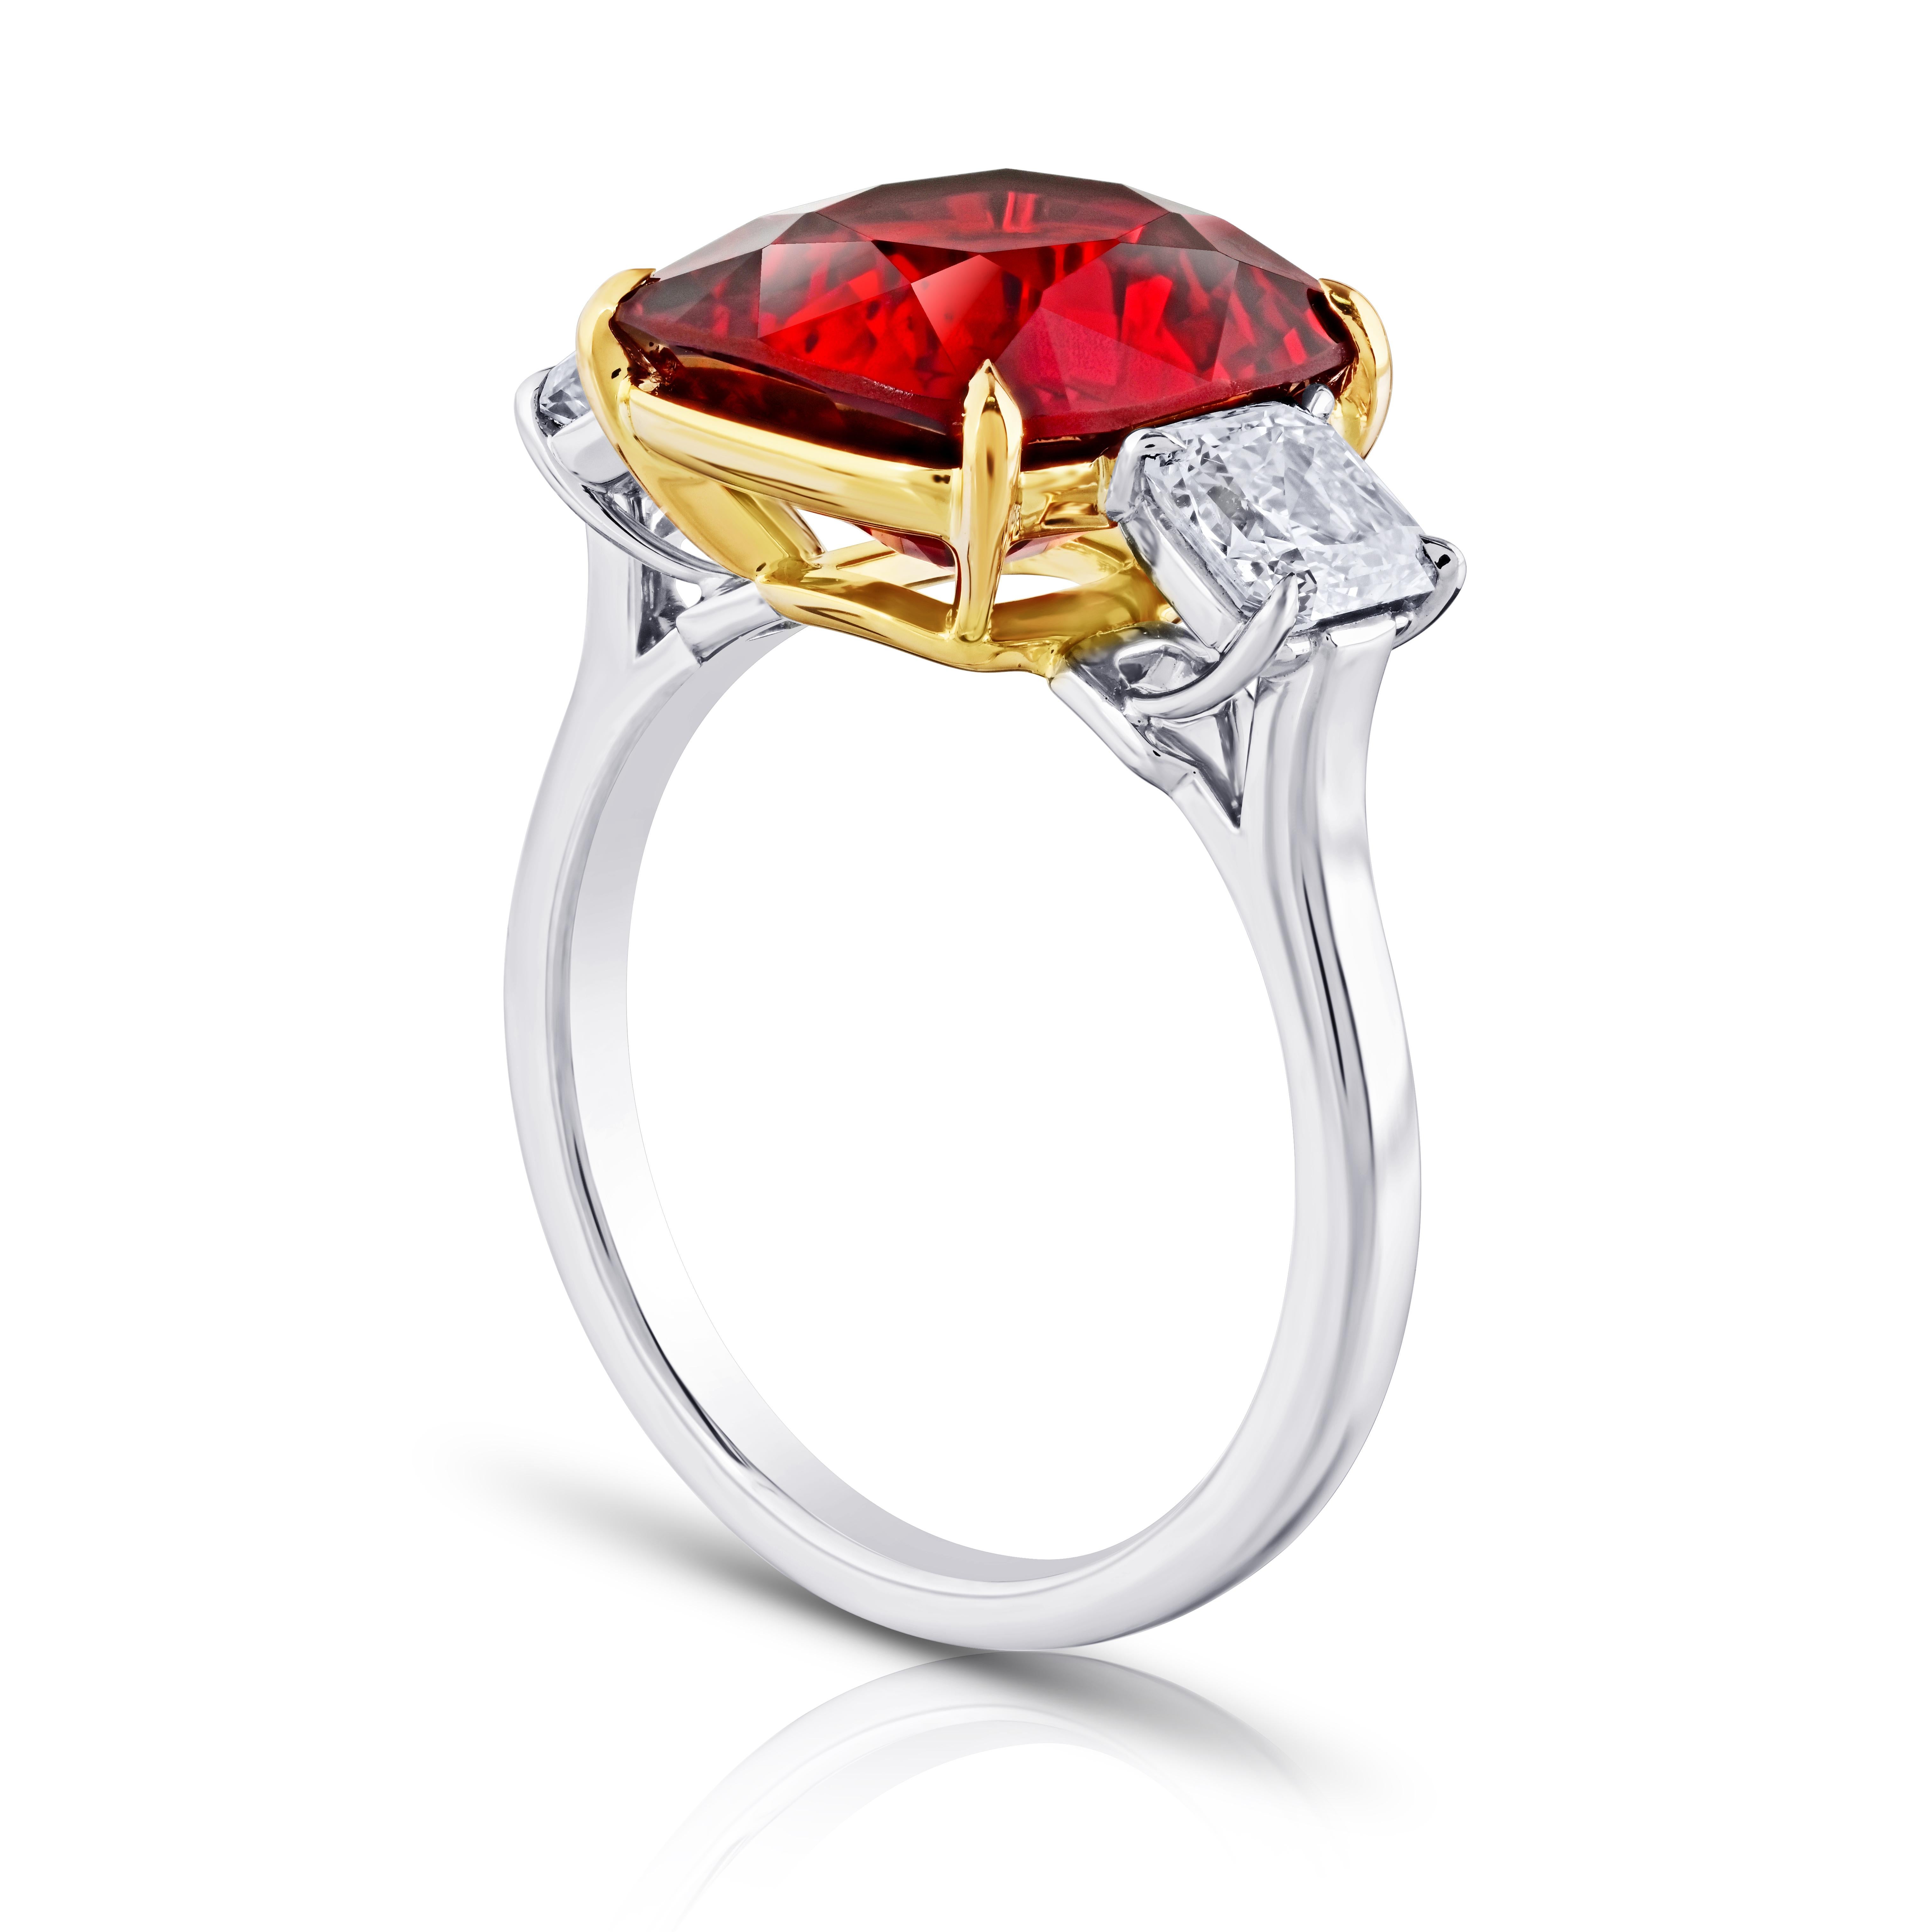 6.39 carat Cushion Red Spinel with Diamonds  set in a handmade Platinum & 18k ring